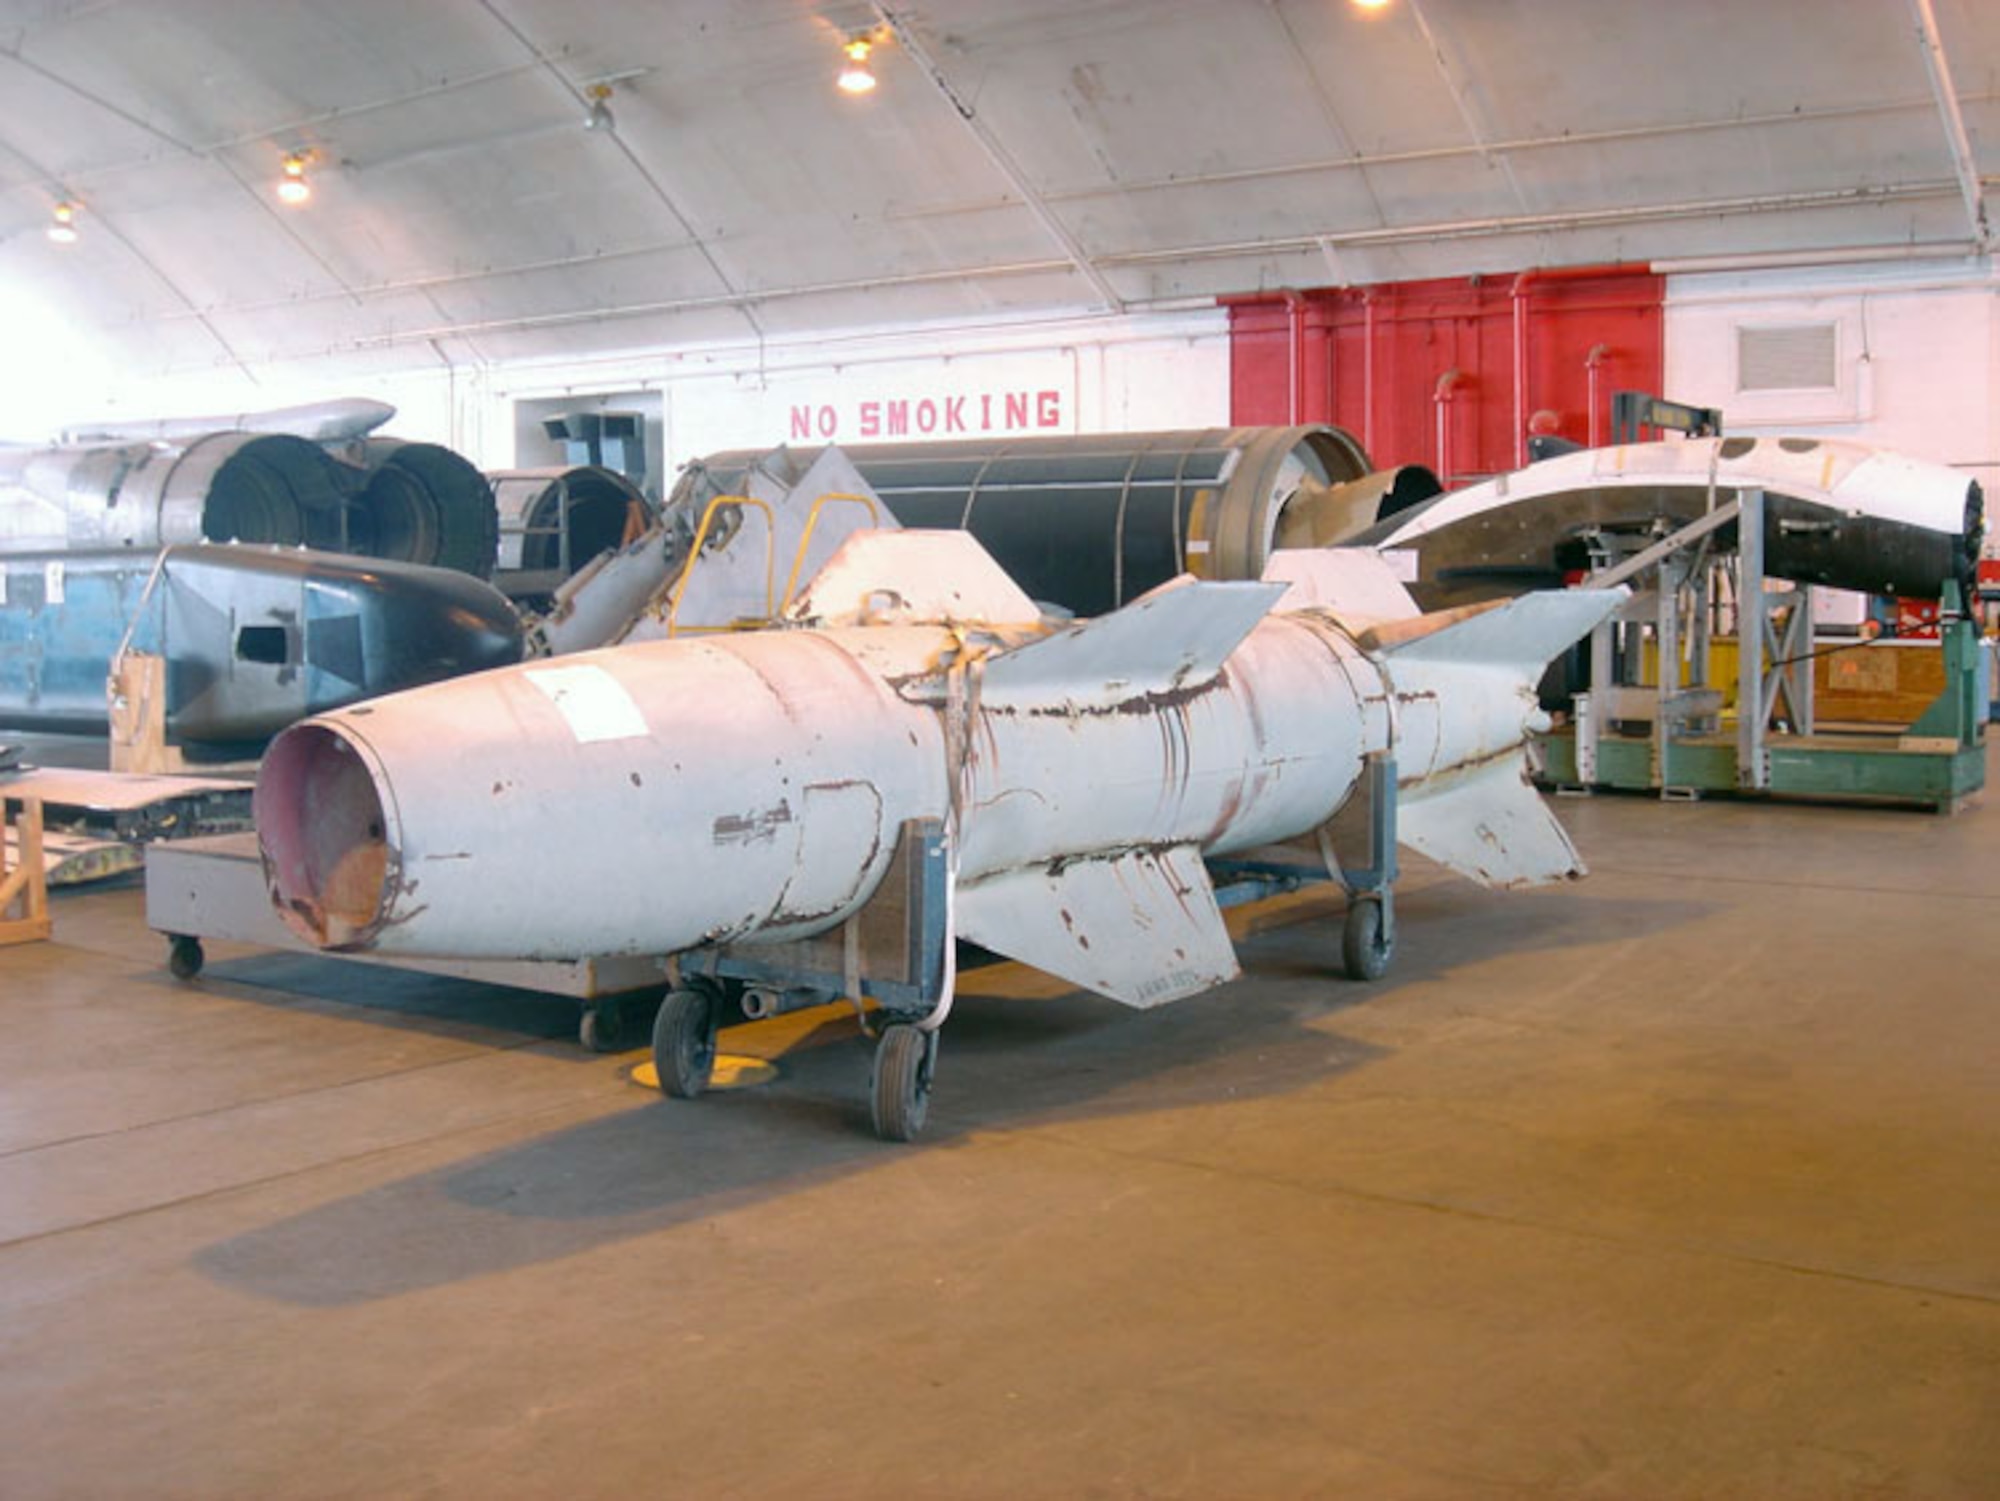 Wasserfall was a radio-controlled, supersonic guided missile for anti-aircraft purpose. Developed by the Germans during World War II, the Wasserfall was tracked by one installation while another would track the target. Then a computer would connect the data to determine when the warhead should be detonated. (U.S. Air Force photo)